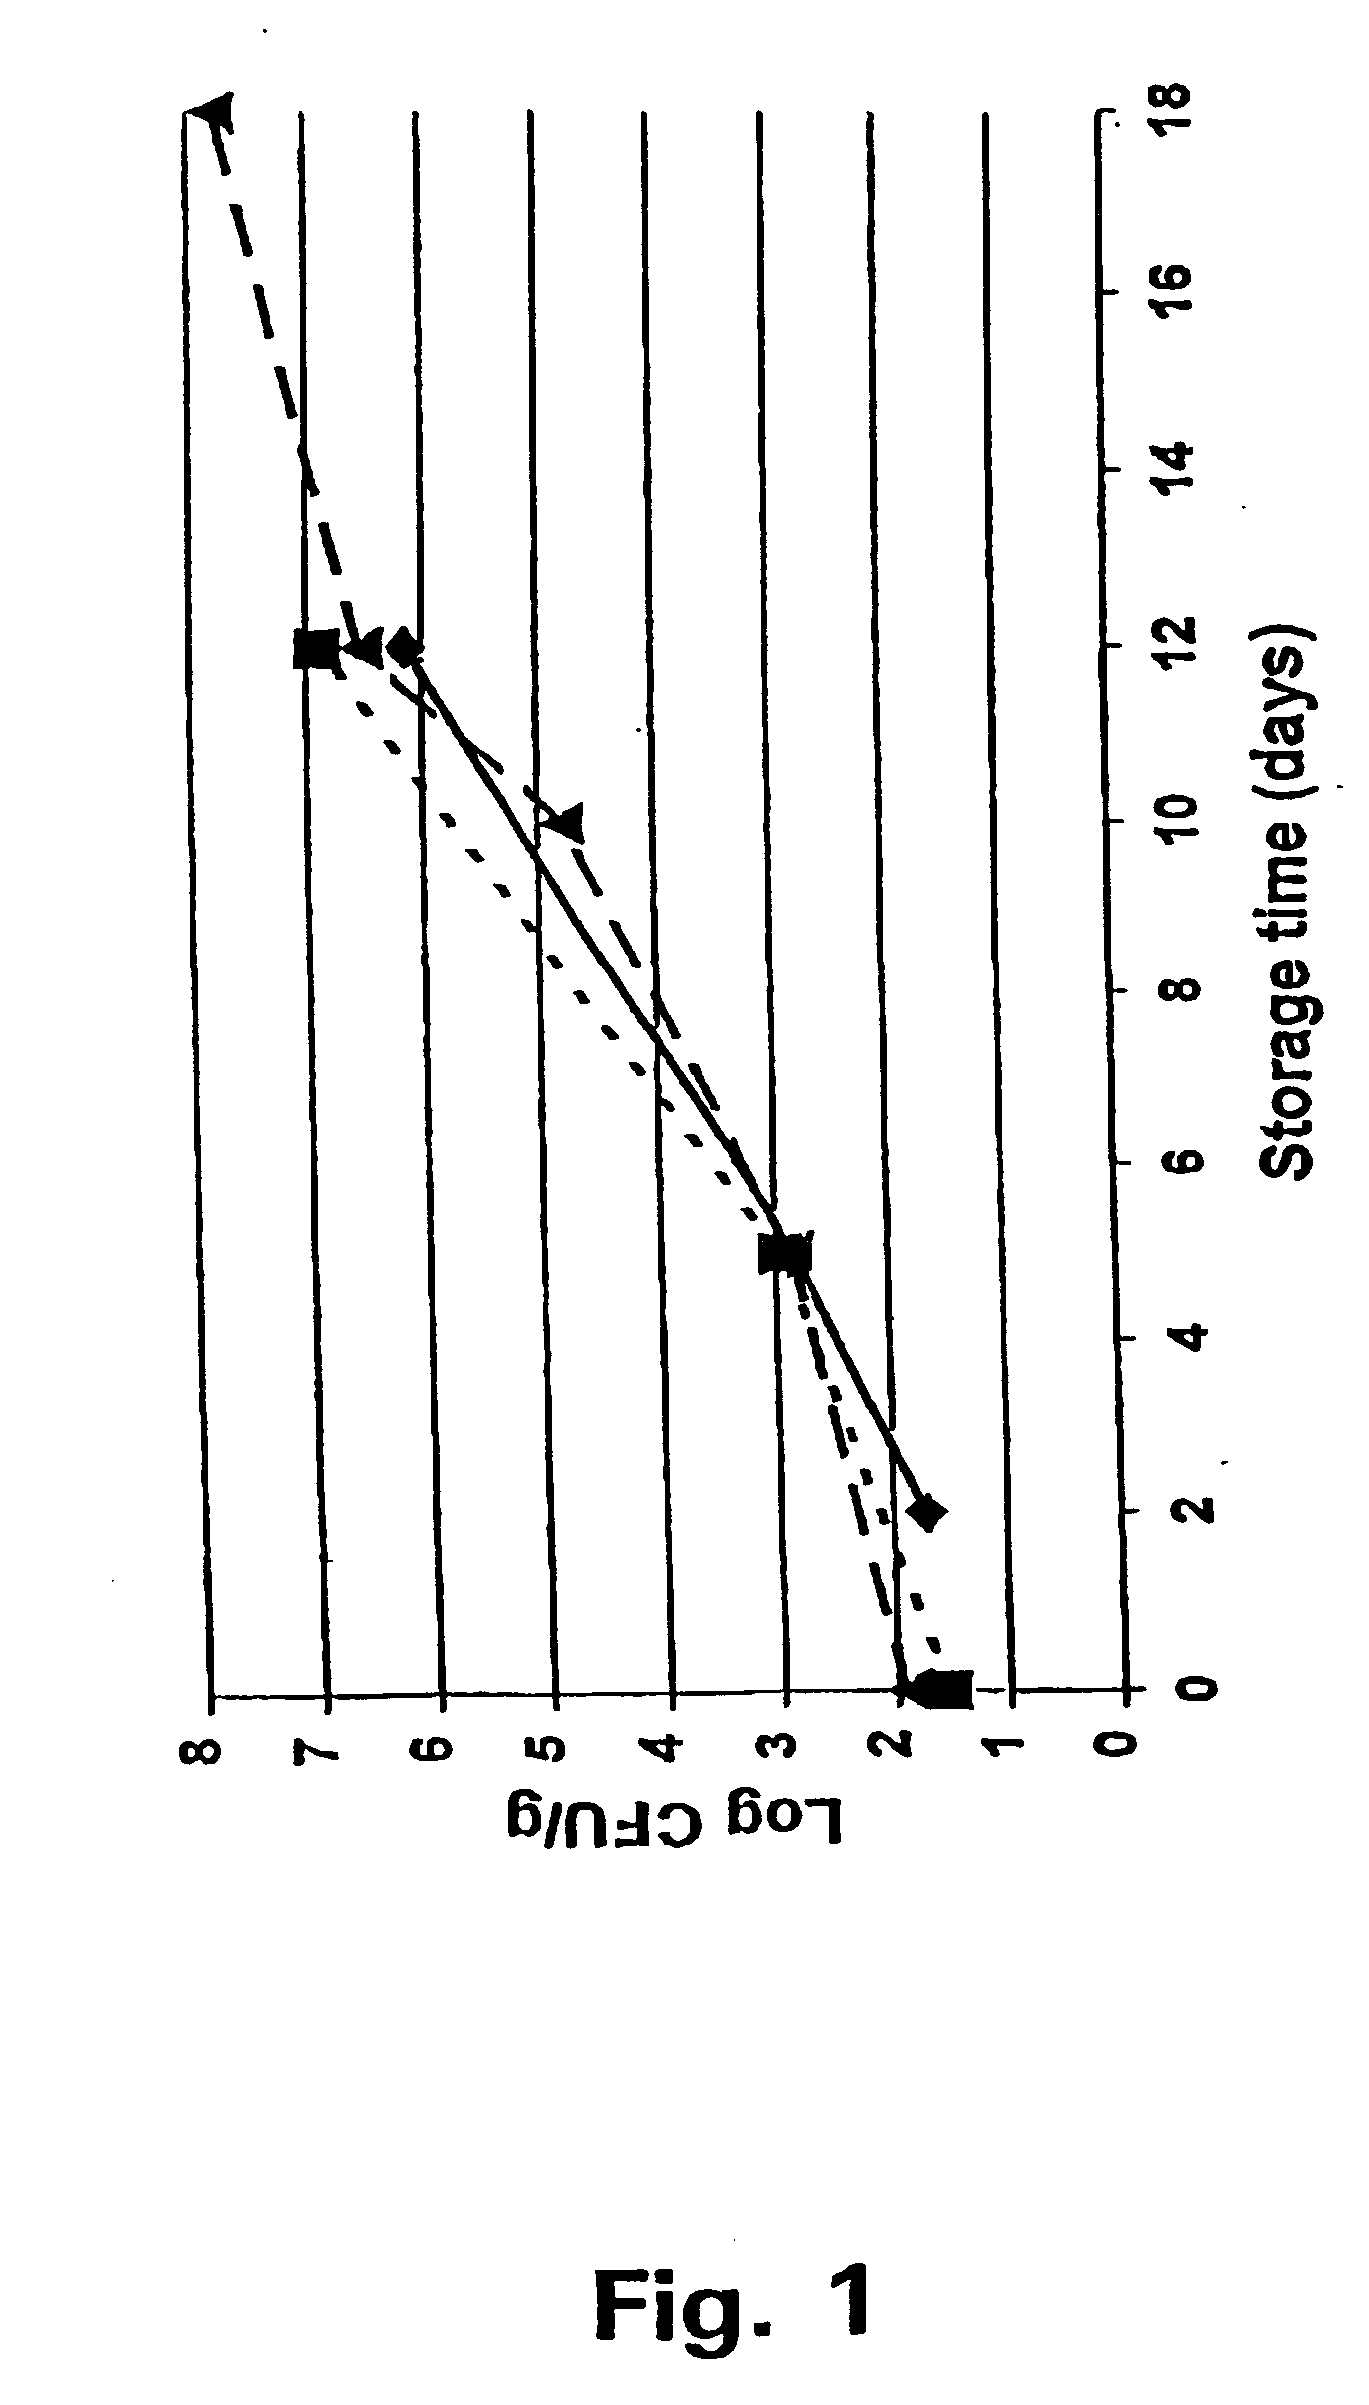 Method for the manufacture of raw fish products